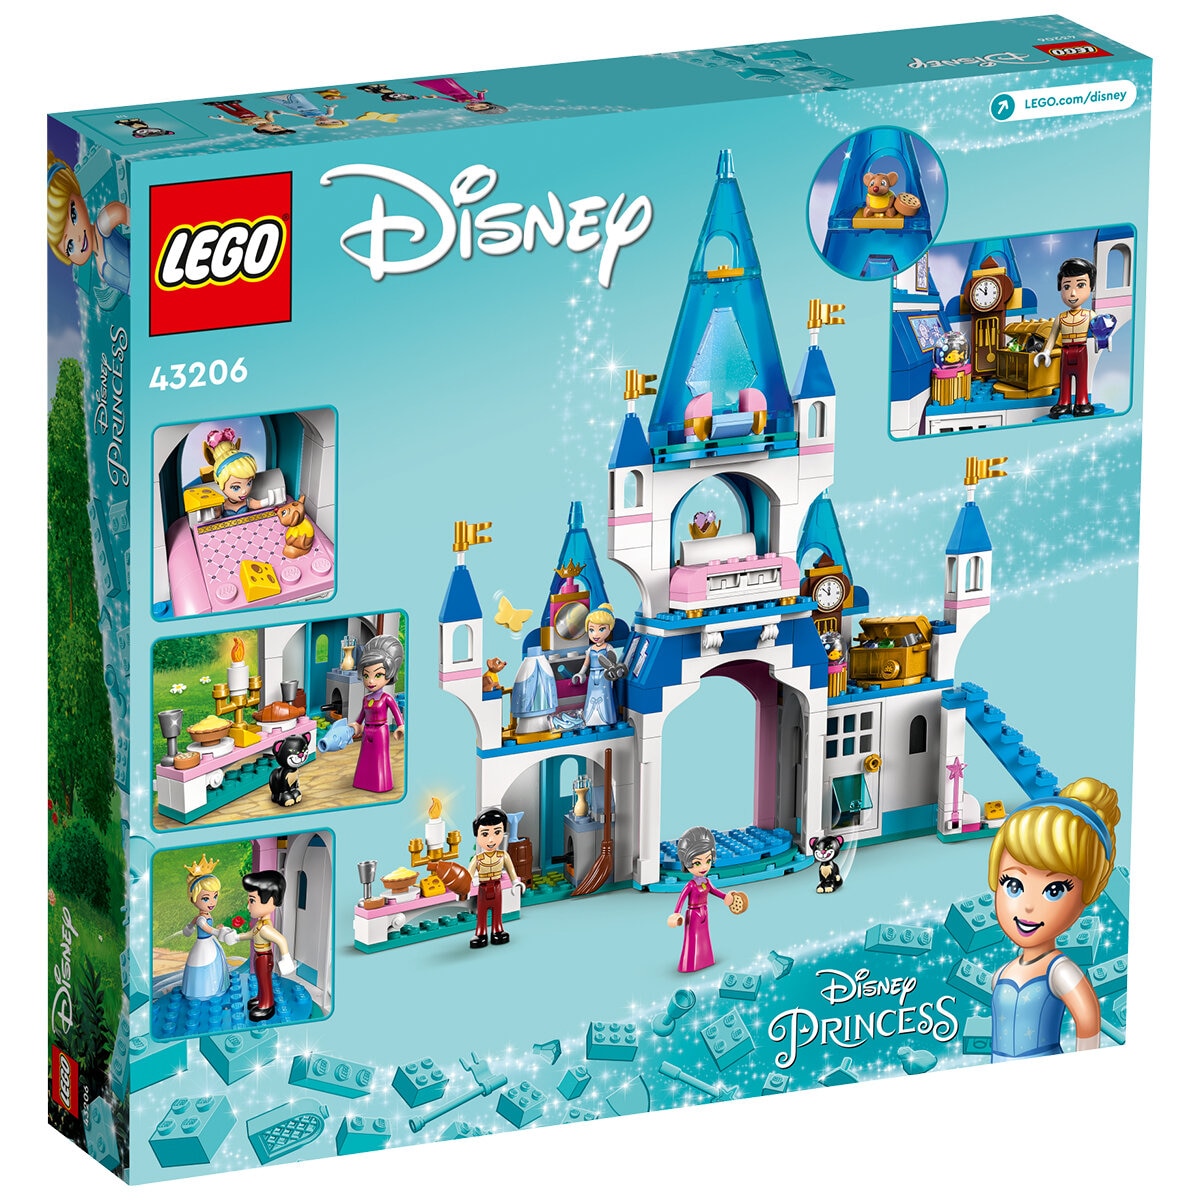 LEGO Cinderella and Prince Charming's 43206 Cost...